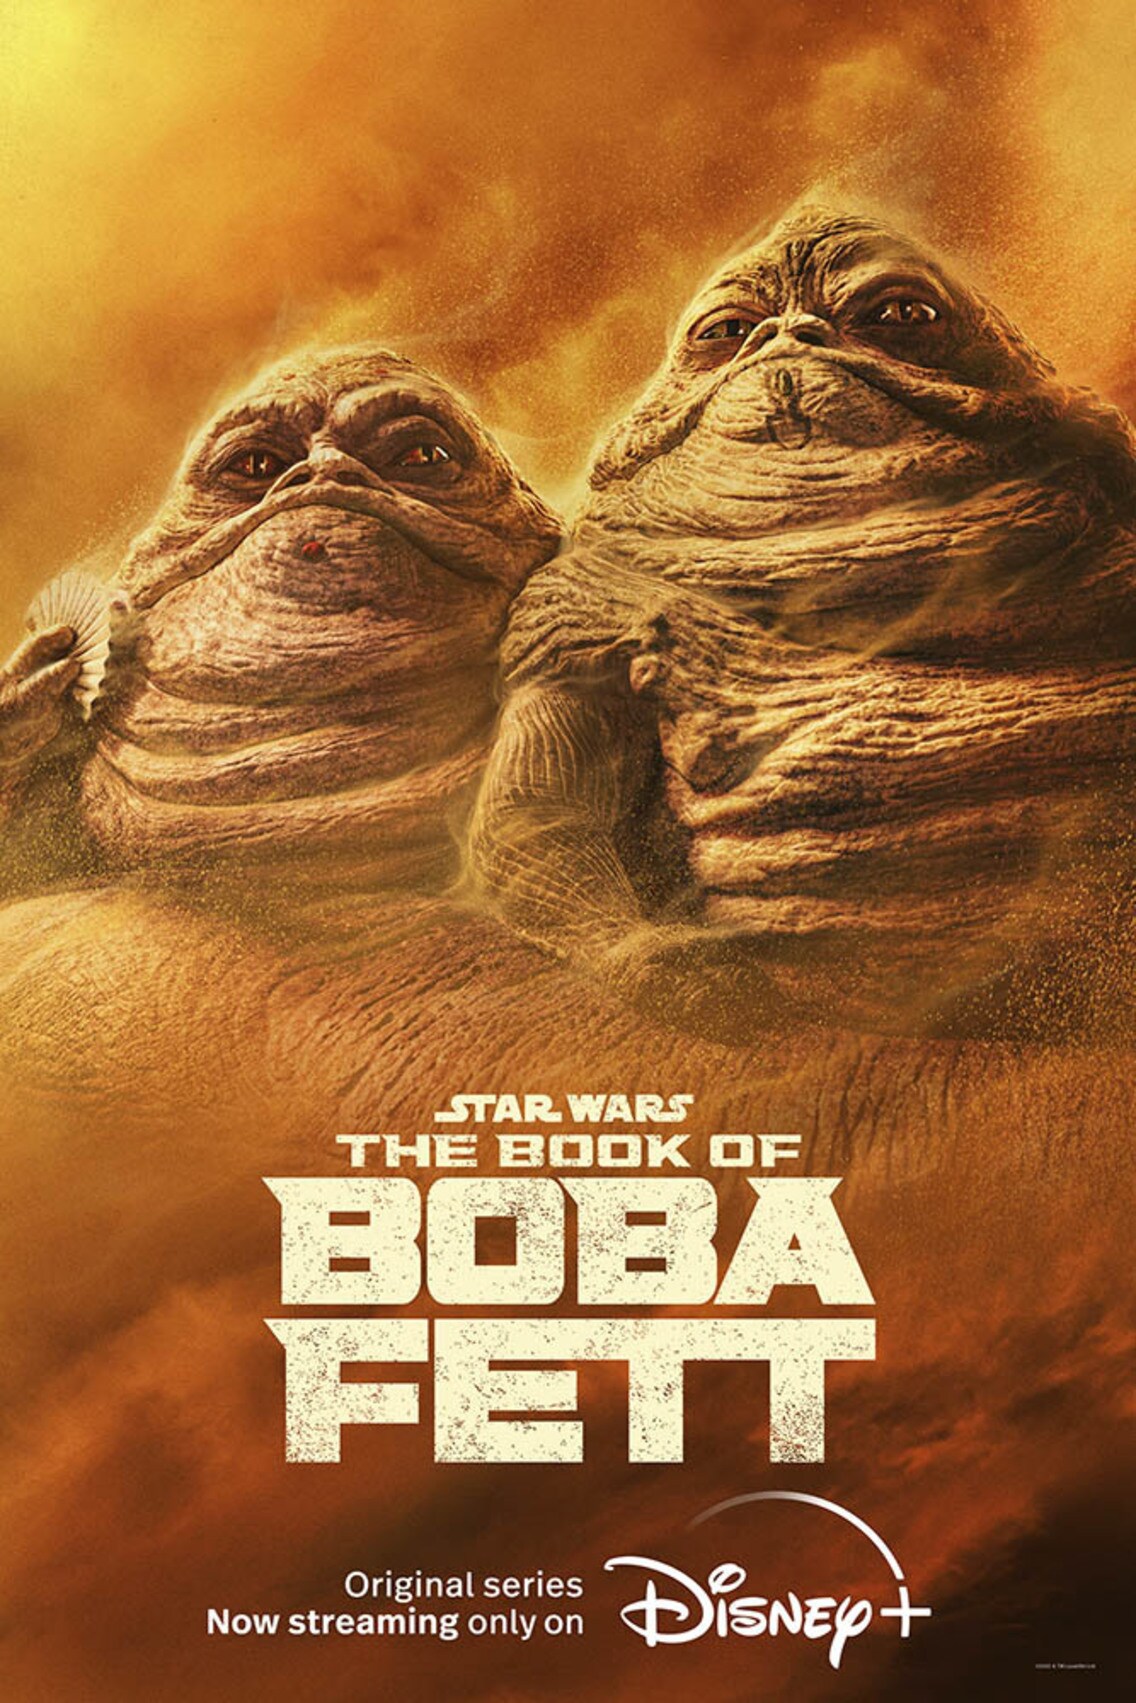 Book Fett of | Gallery The Poster Boba